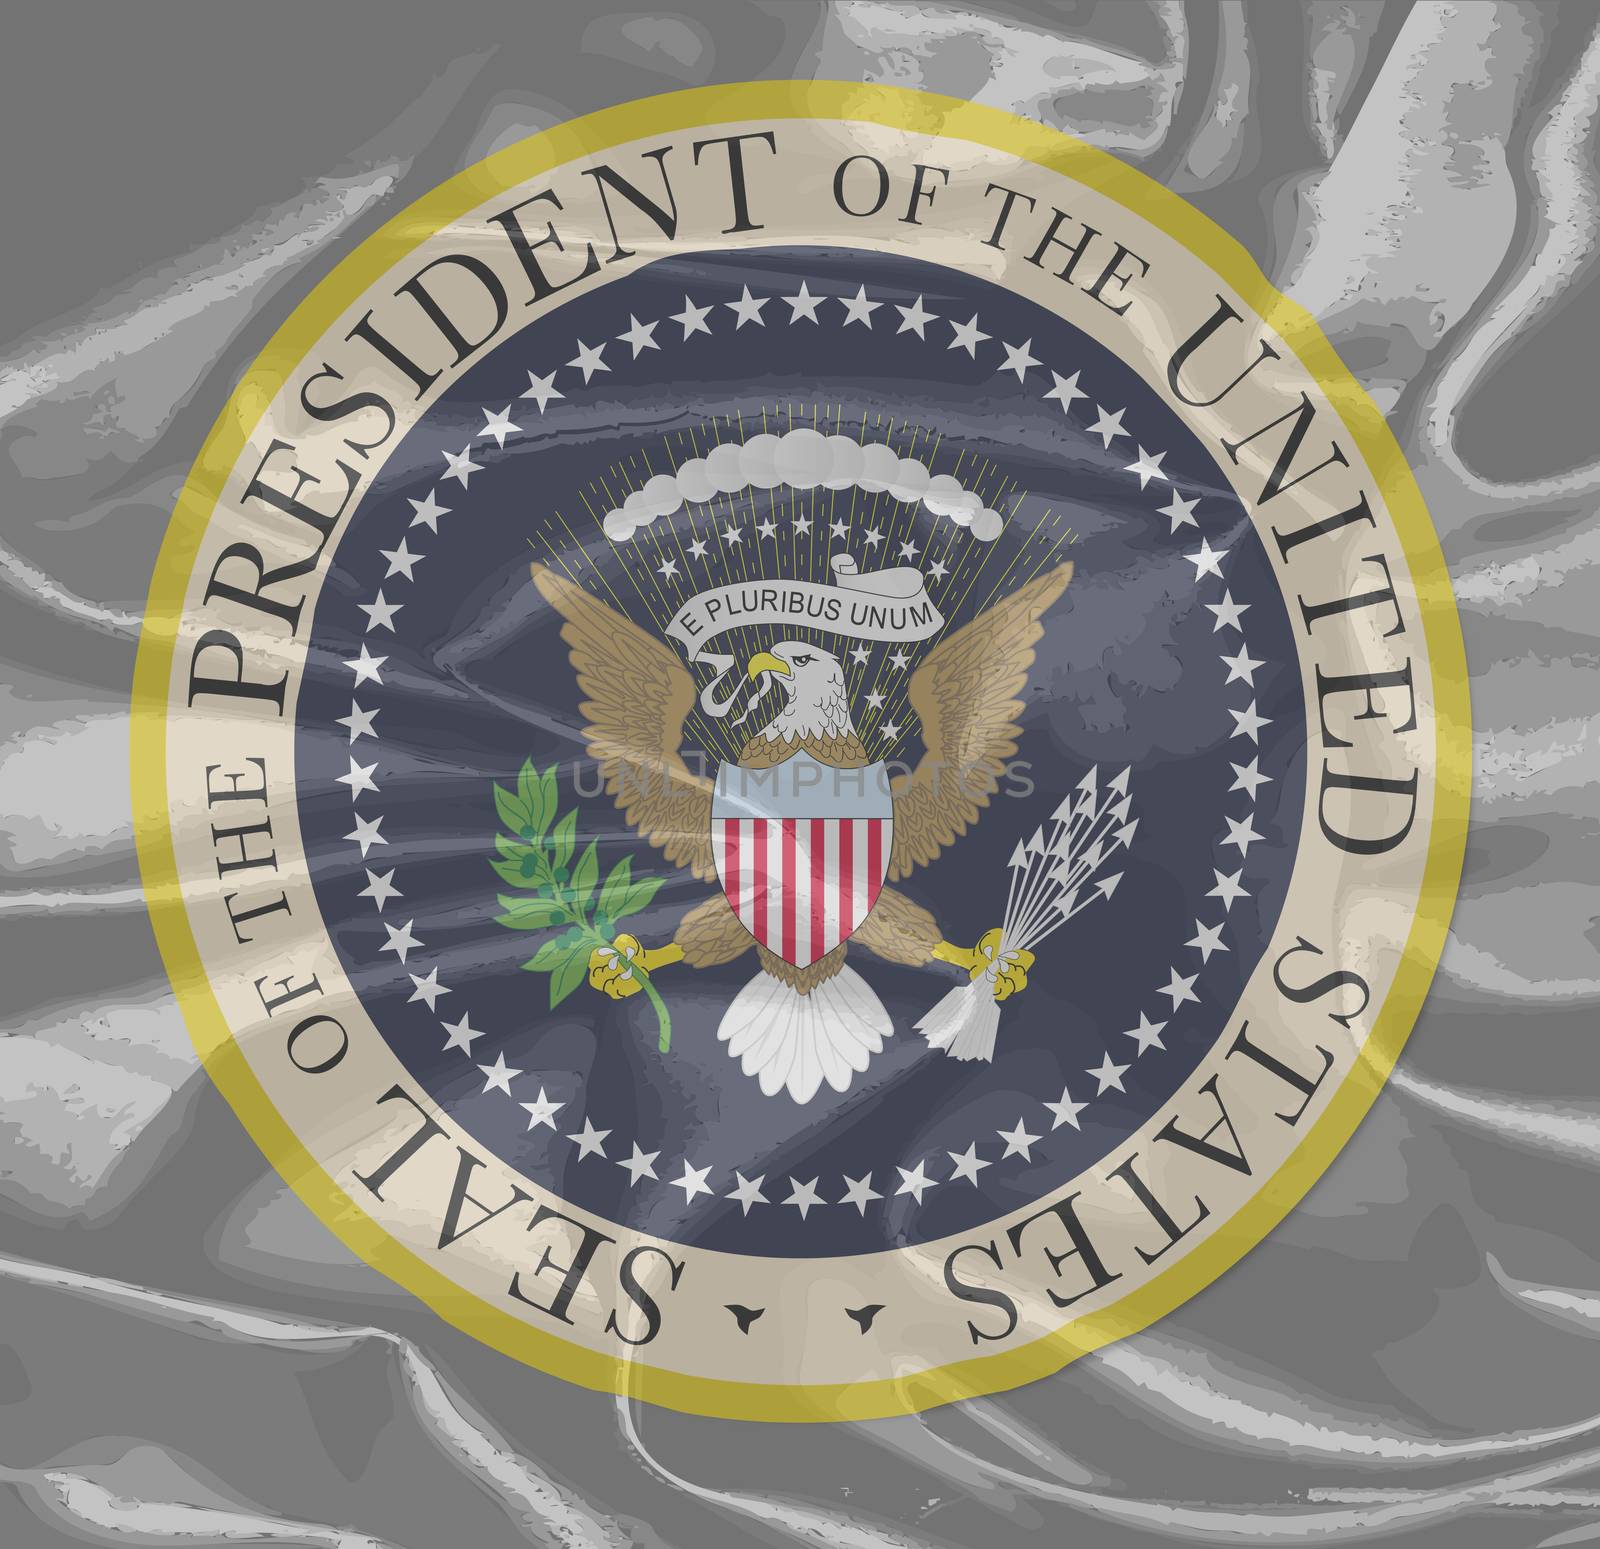 A depiction of the seal of the president of the United States of America on a silk background